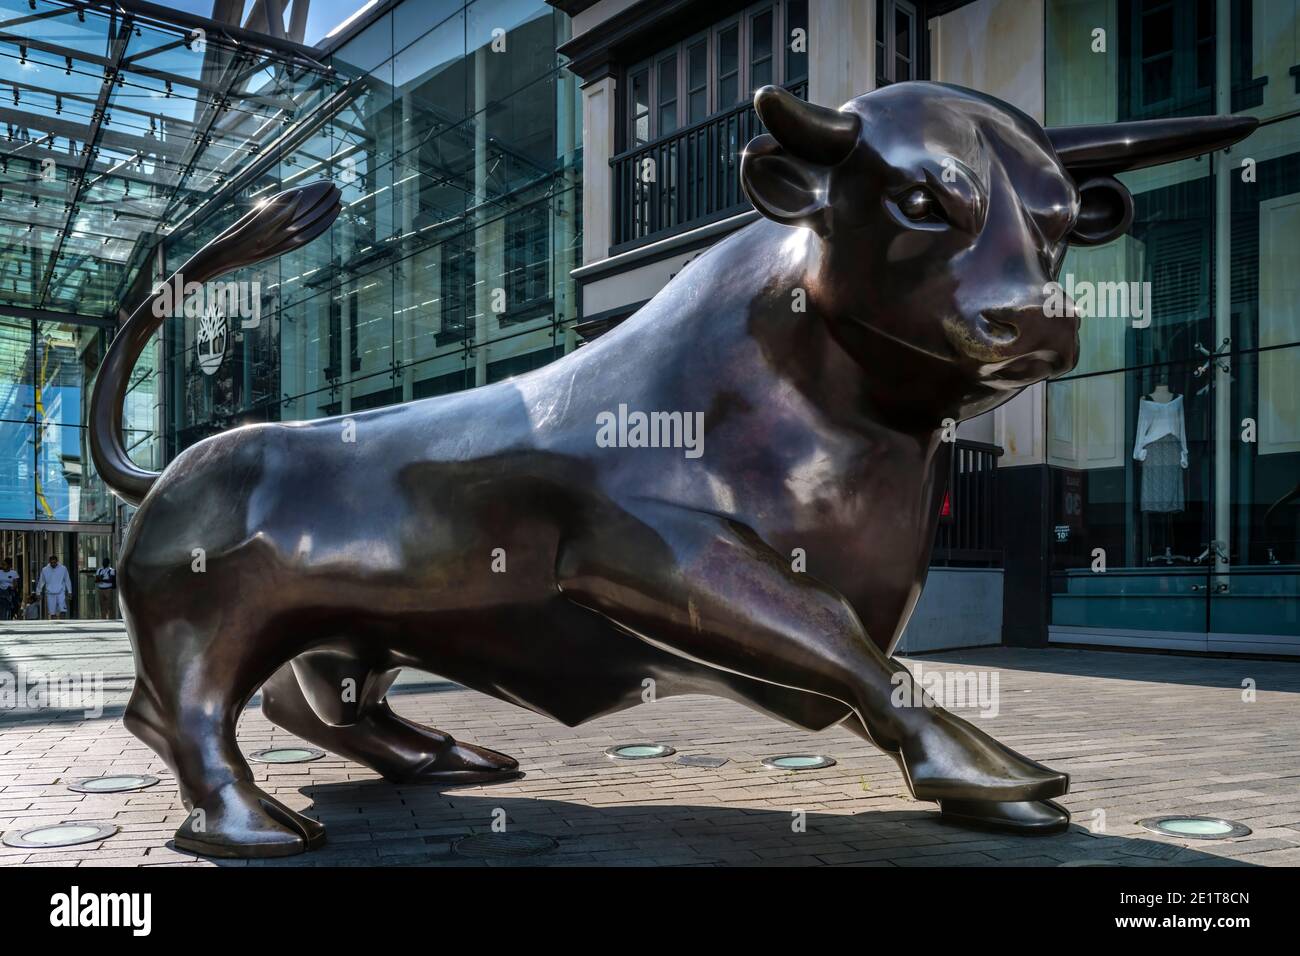 The Bullring's famous six-ton bronze bull, designed by artist Laurence Broderick, stands guard outside one of the entrances to Birminghams giant shopp Stock Photo